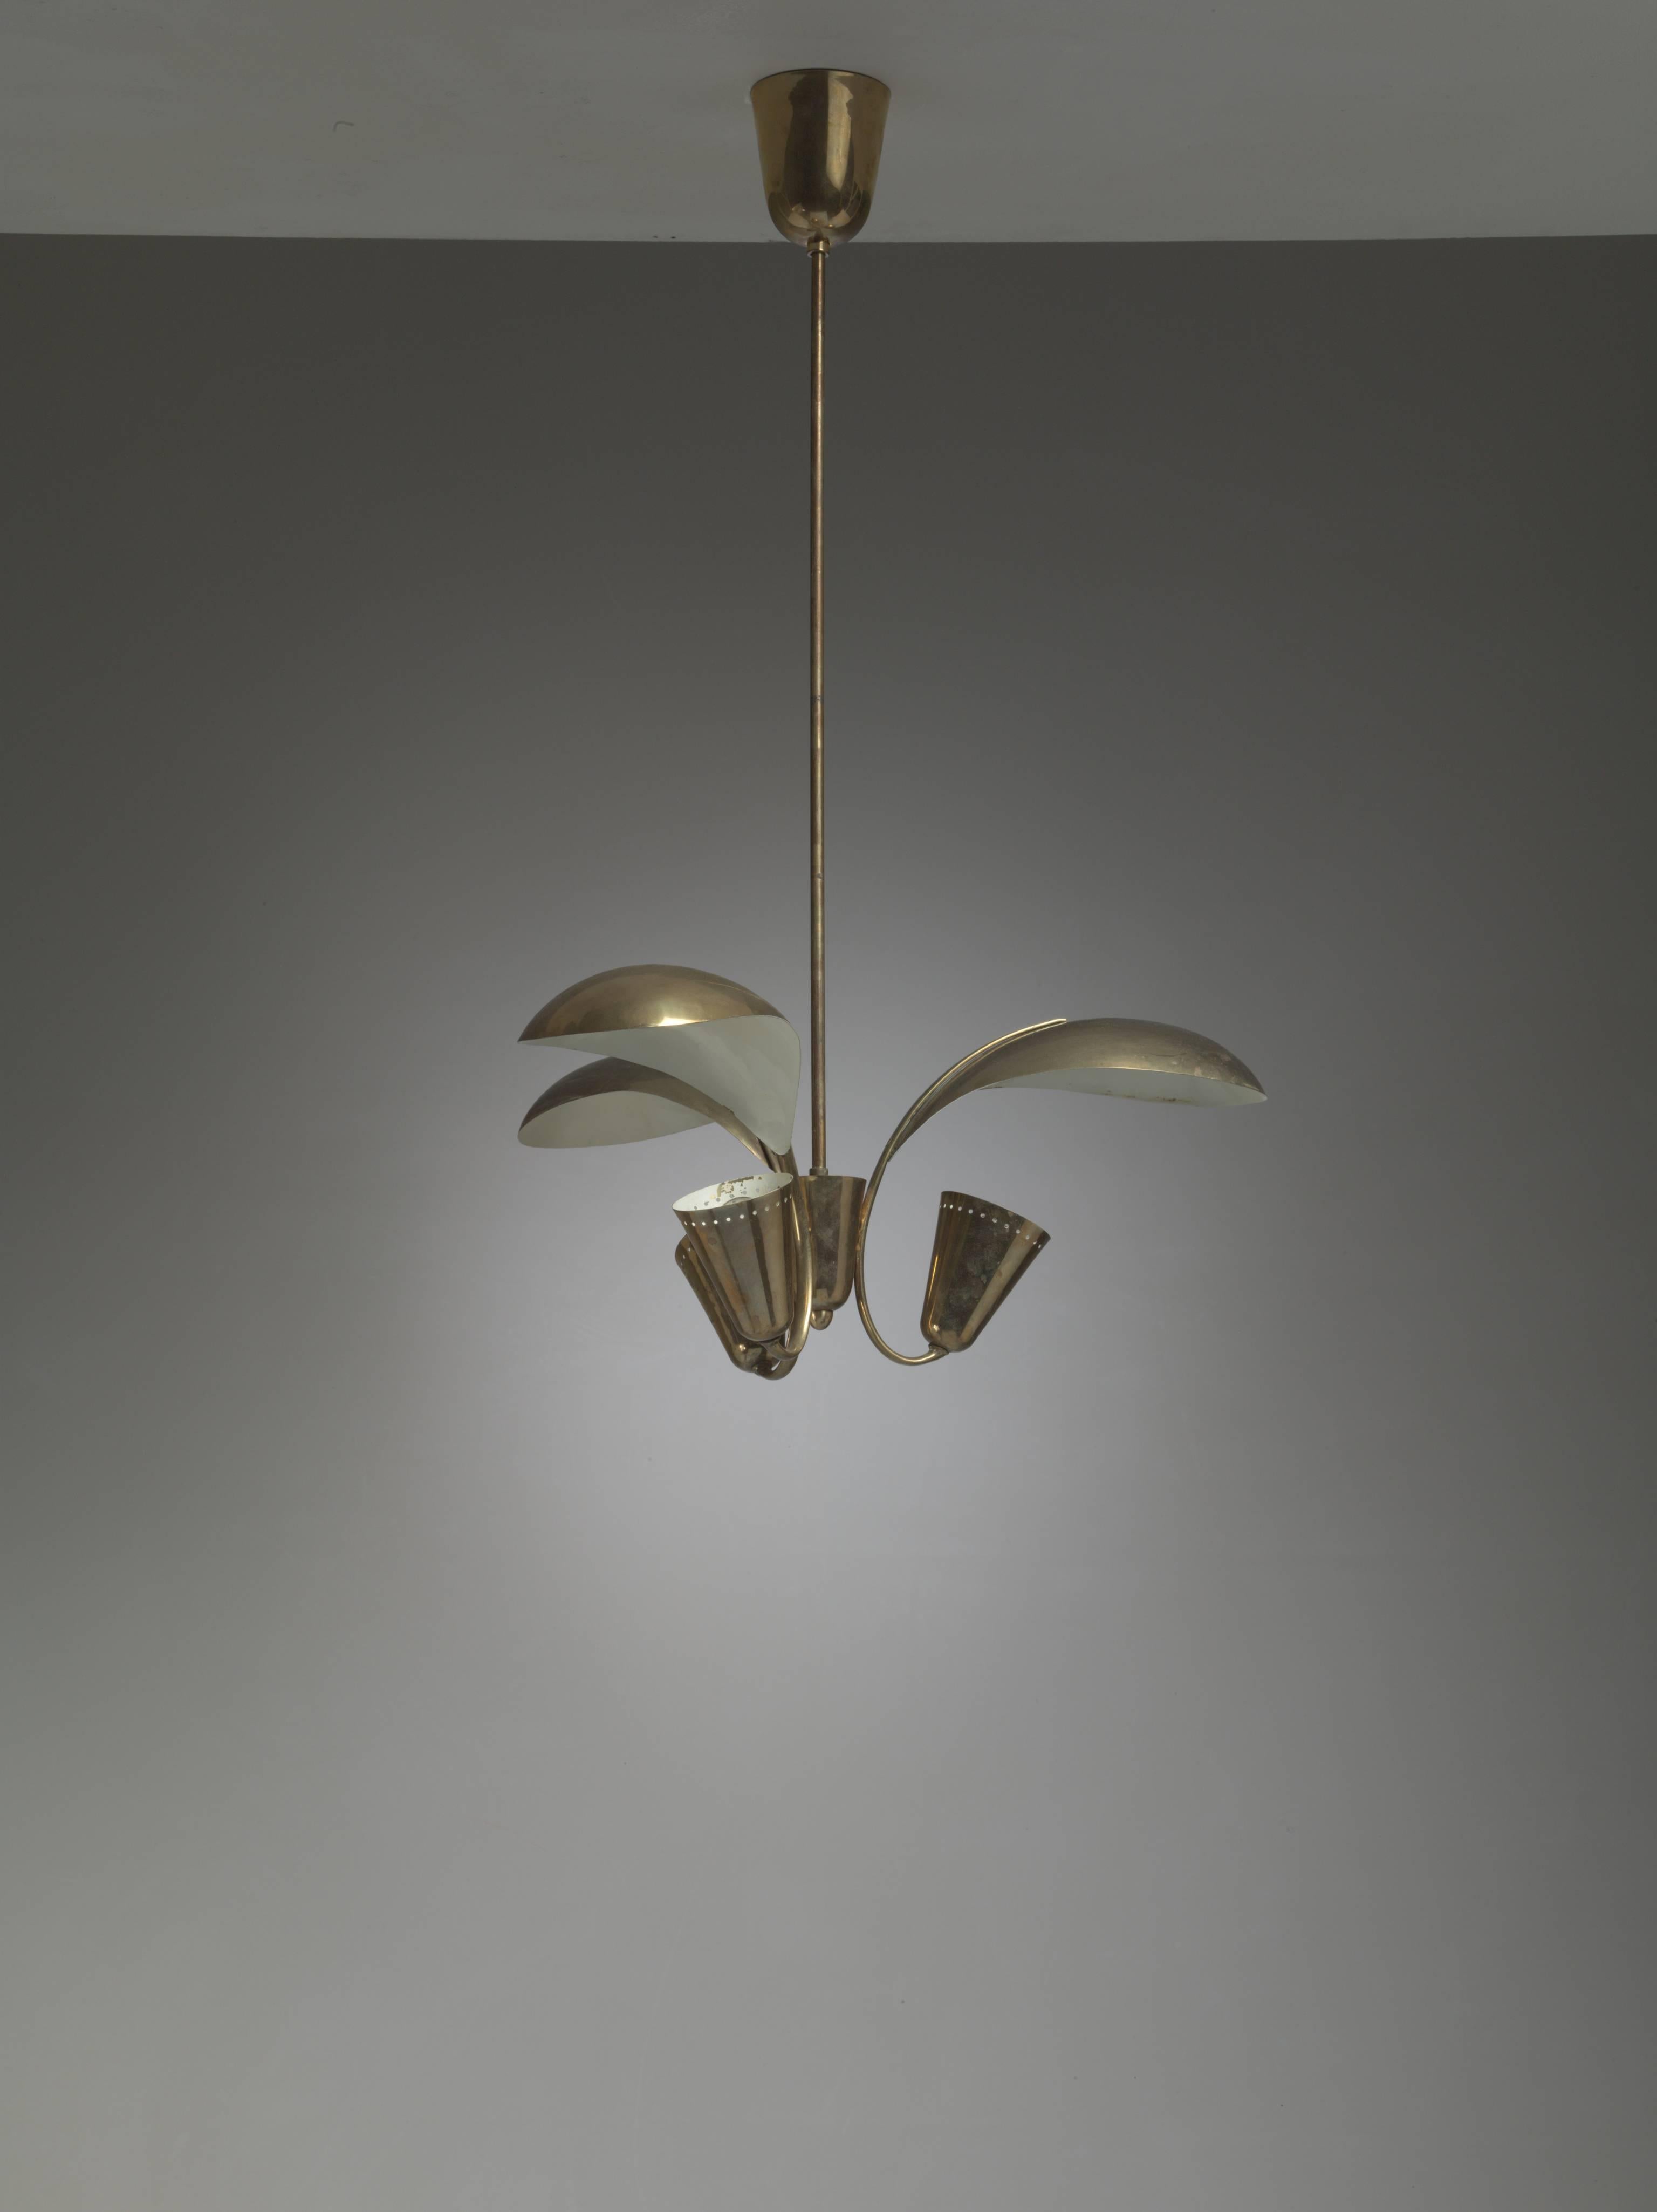 Finnish Paavo Tynell Three-Armed Brass Chandelier, Idman, Finland, 1950s For Sale